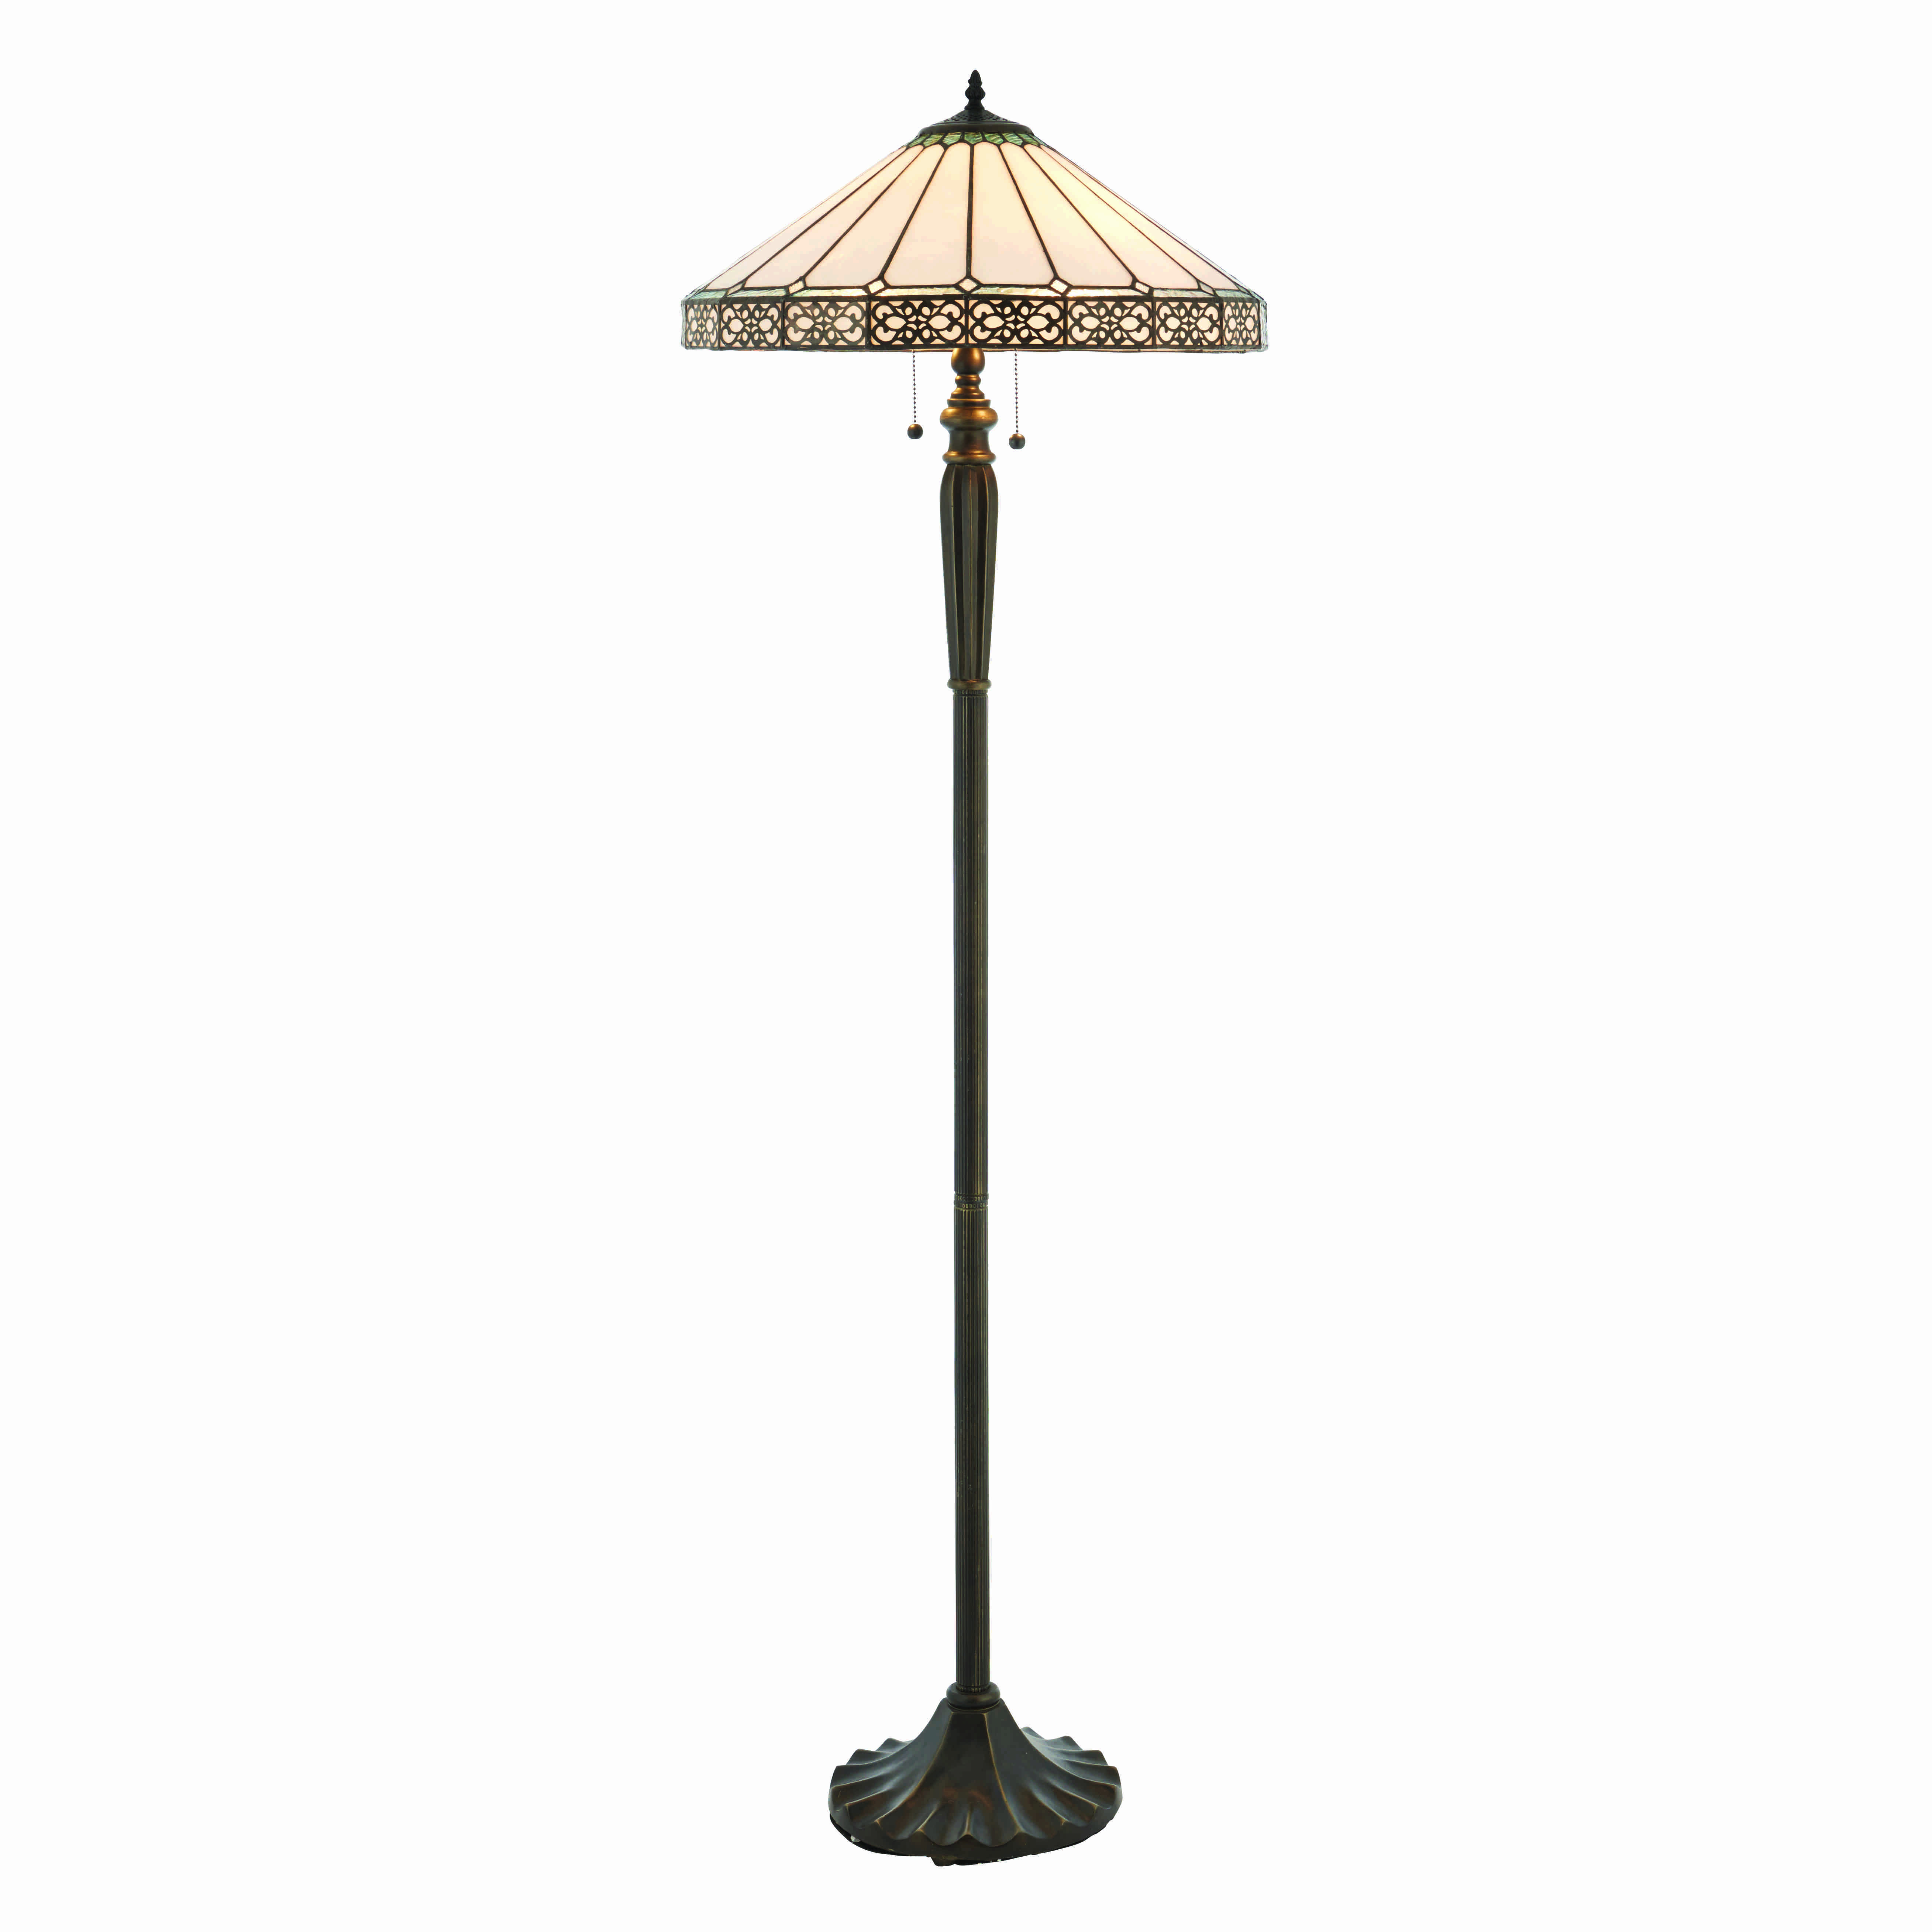 Awesome Bronze Floor Lamp Architectures Lighting Target Oil inside proportions 5235 X 5235